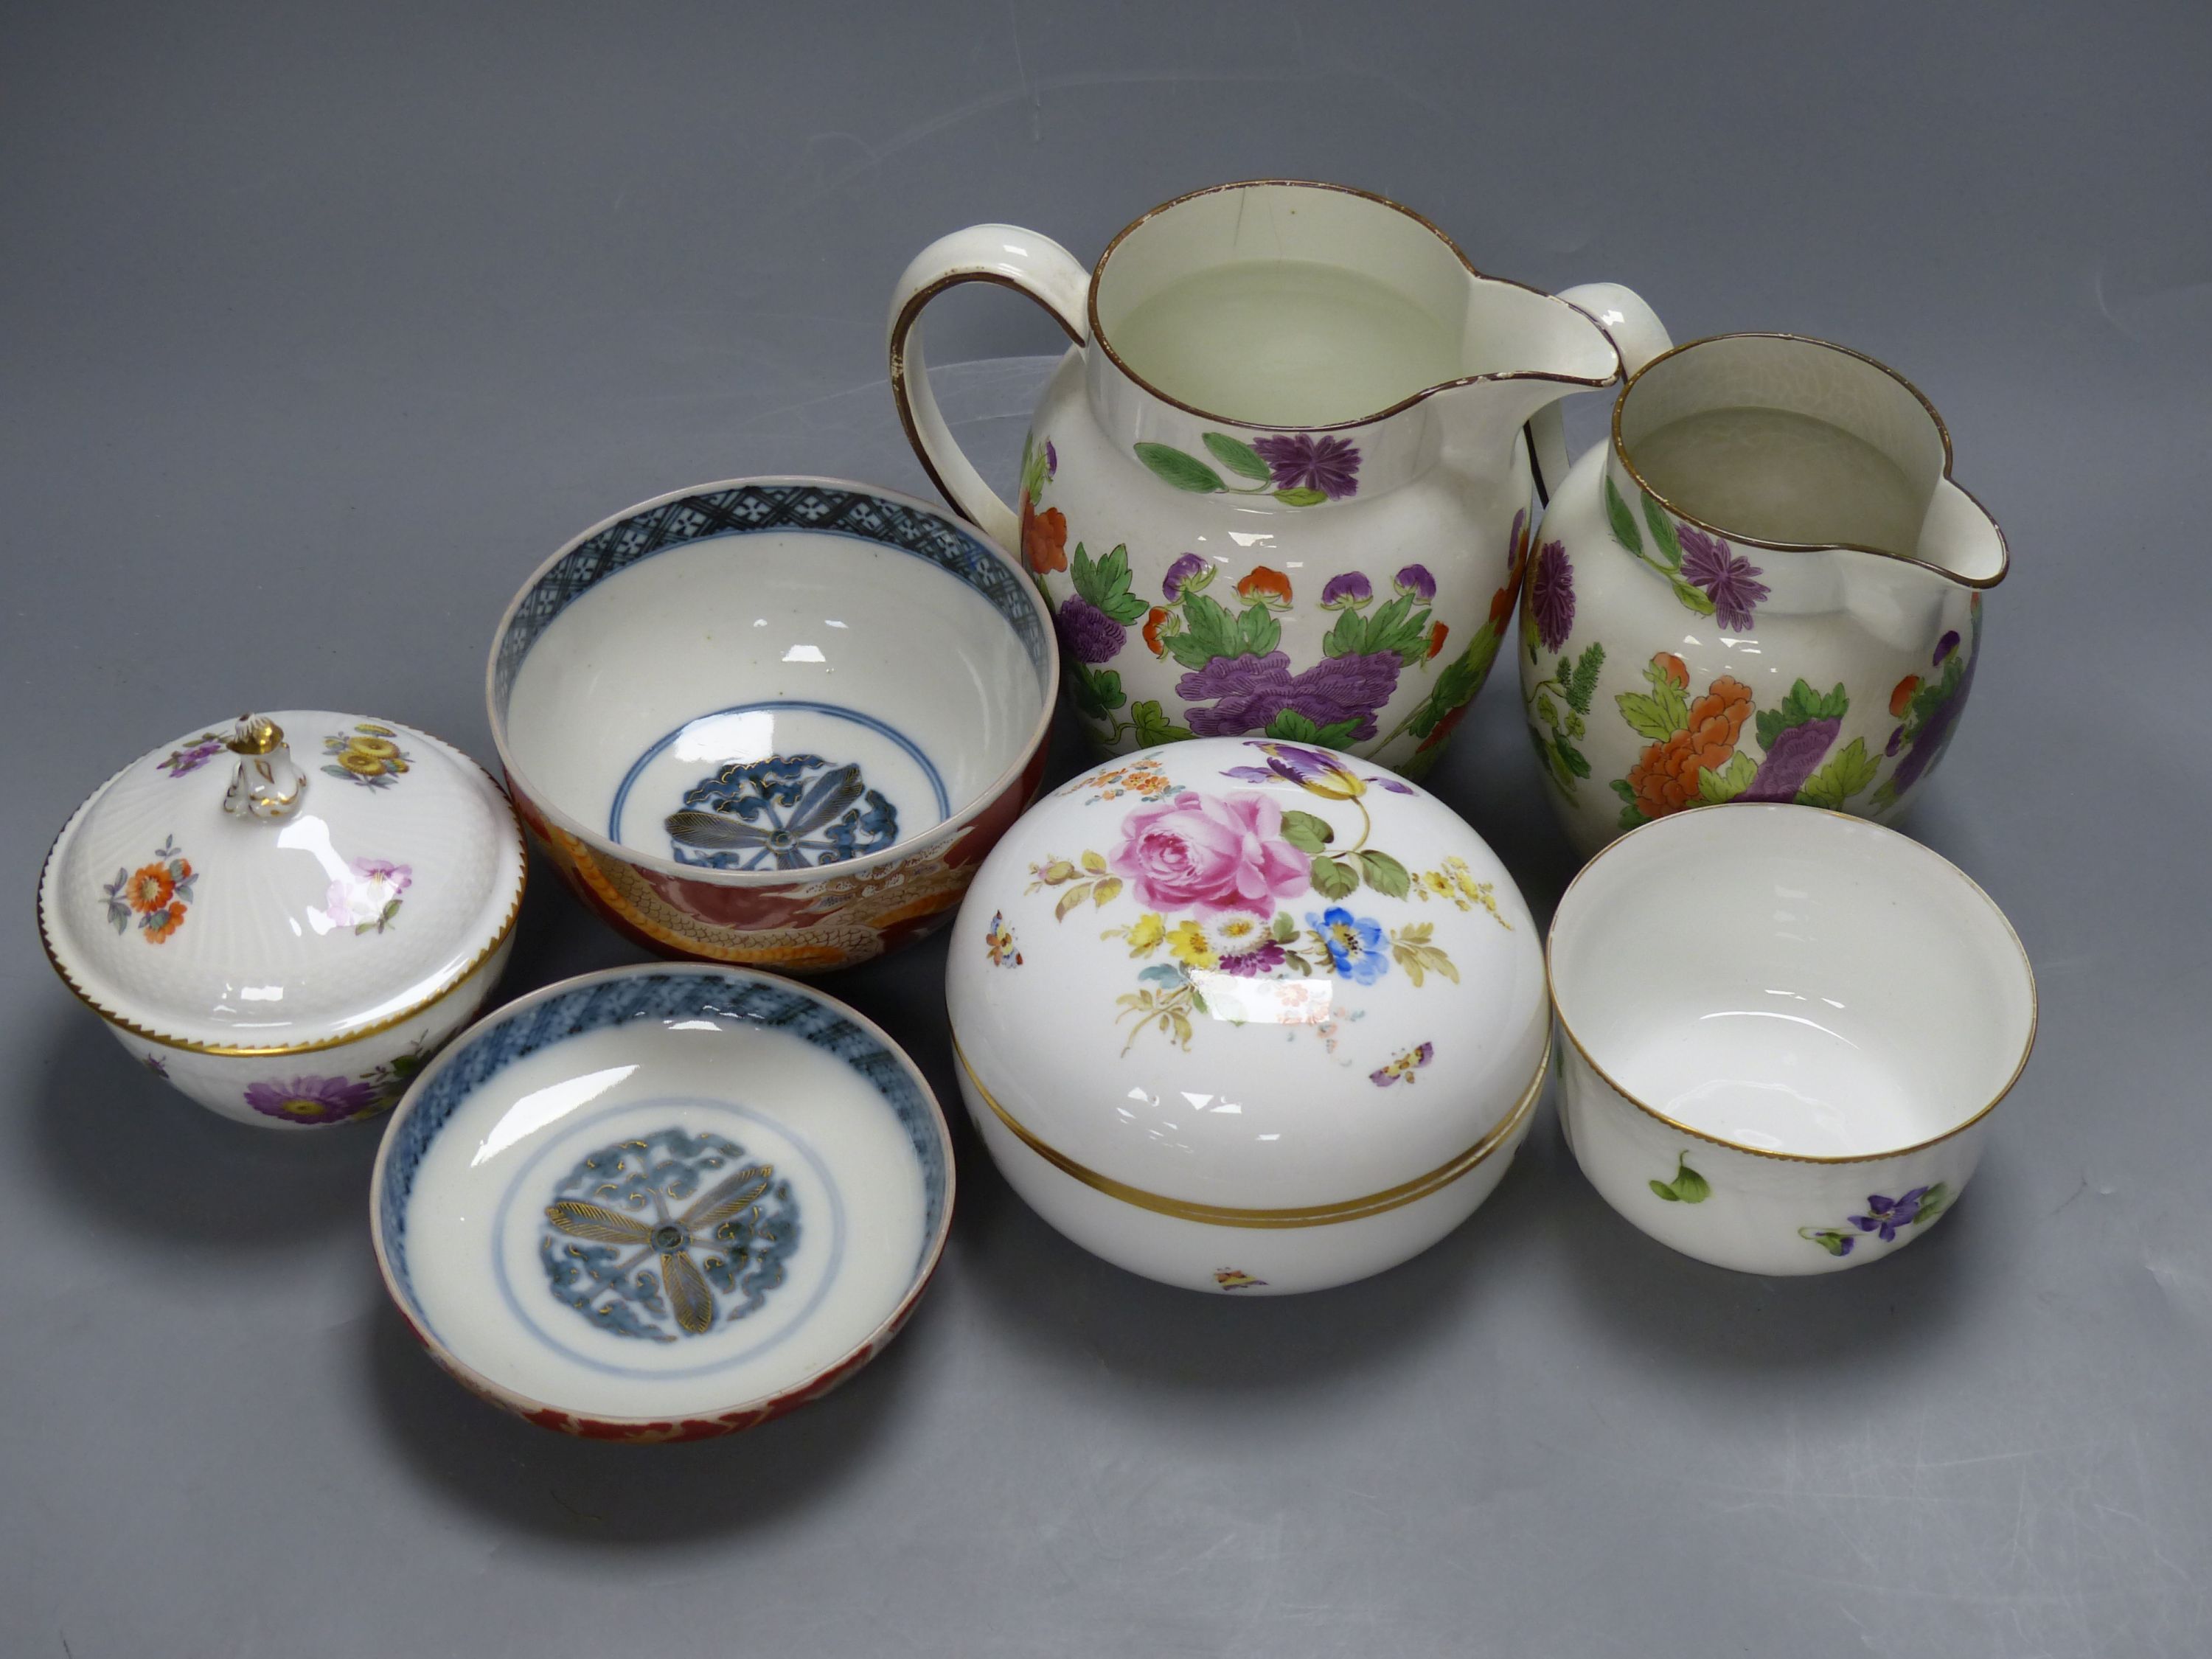 Two Wedgwood jugs, a Meissen box and cover, Royal Copenhagen sucrier, an Imari bowl and Cover etc.